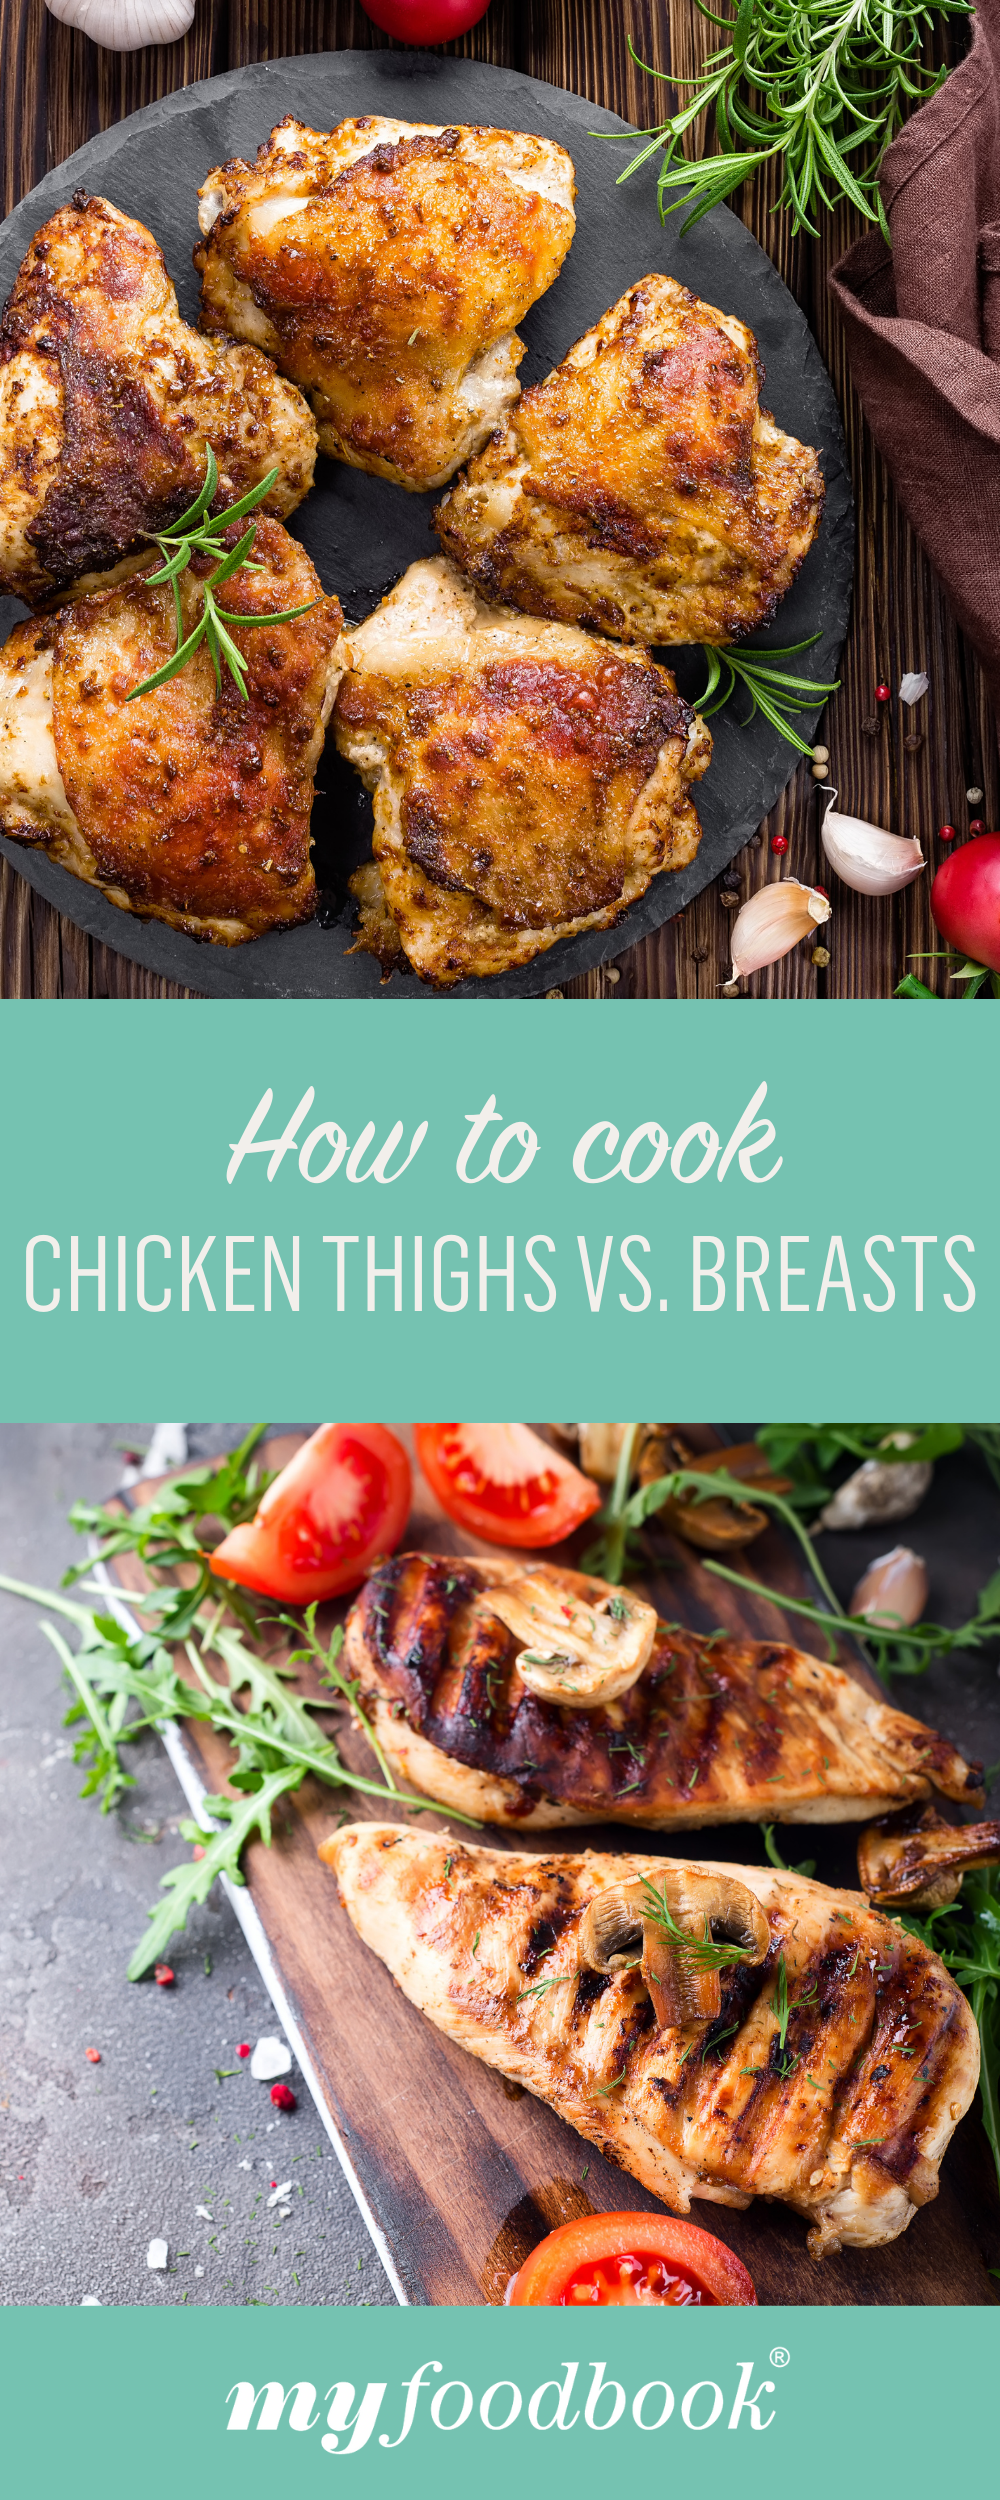 how to cook chicken thighs vs breasts